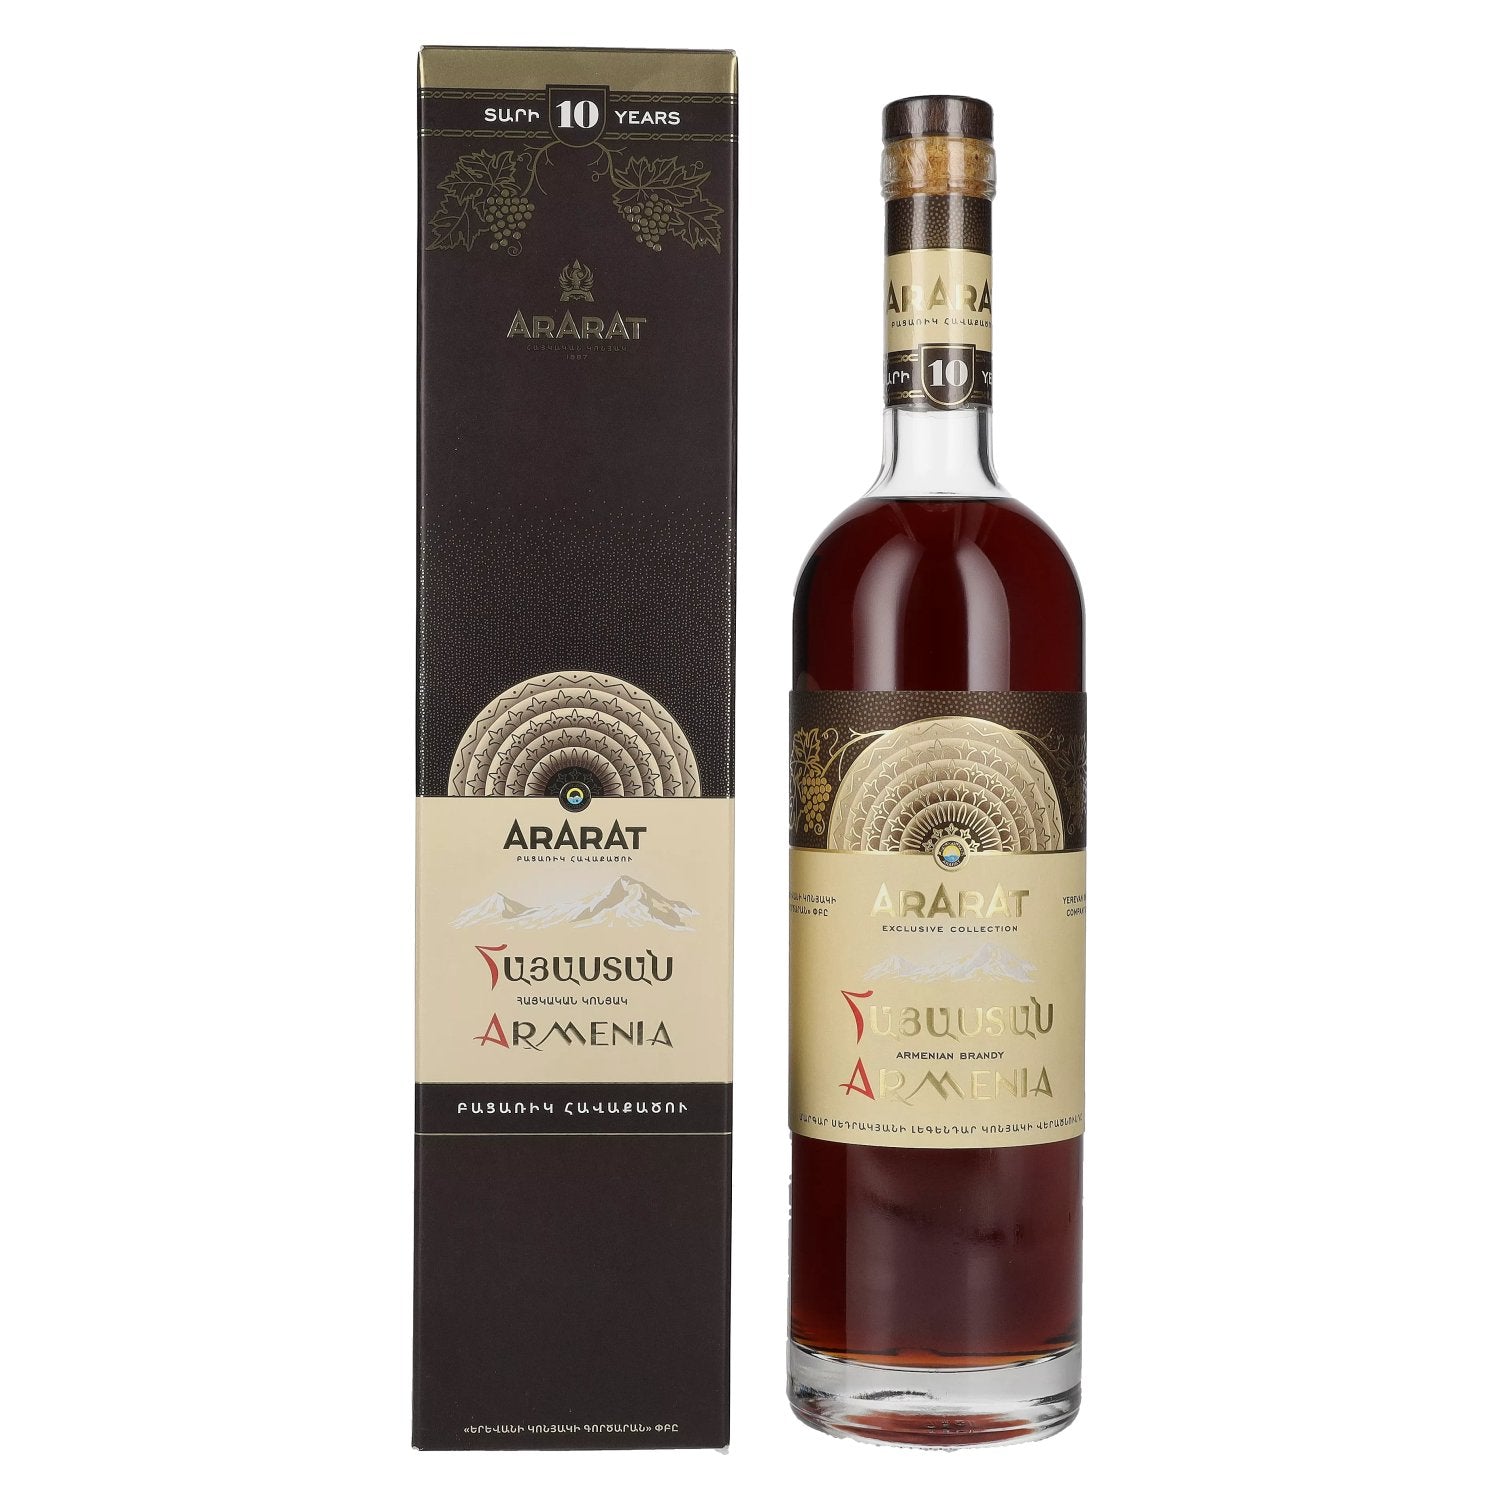 Ararat Armenia 10 Years Old Exclusive Collection 45% Vol. 0,75l in Giftbox